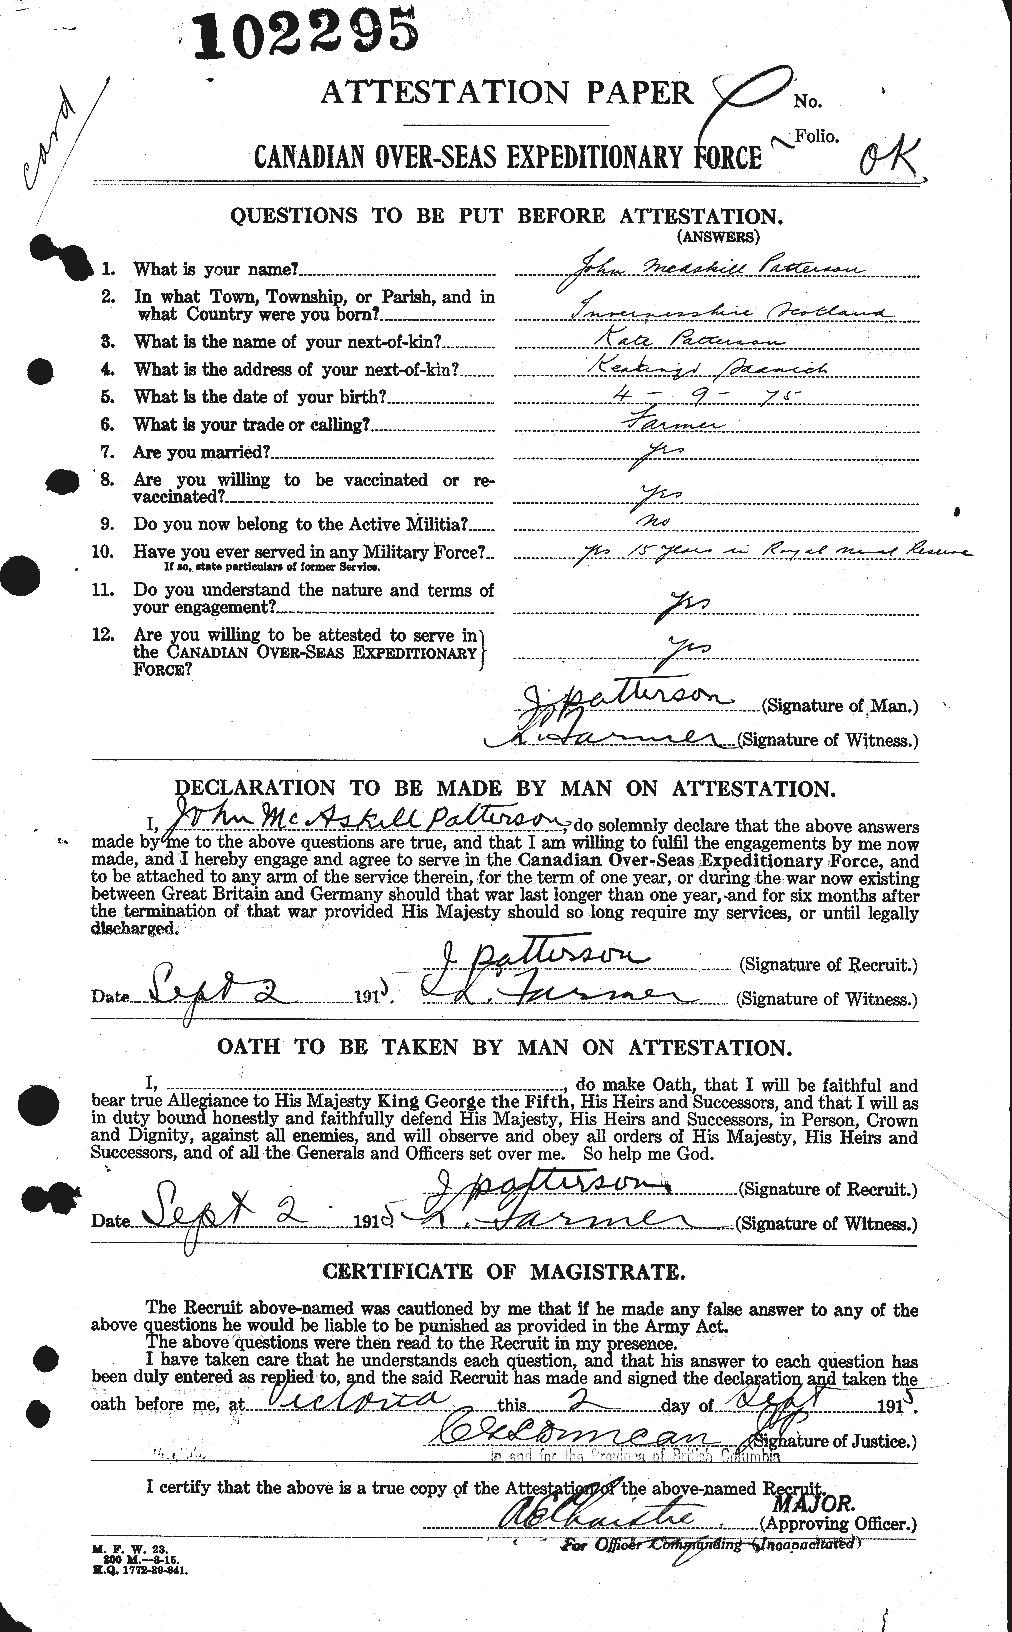 Personnel Records of the First World War - CEF 568605a